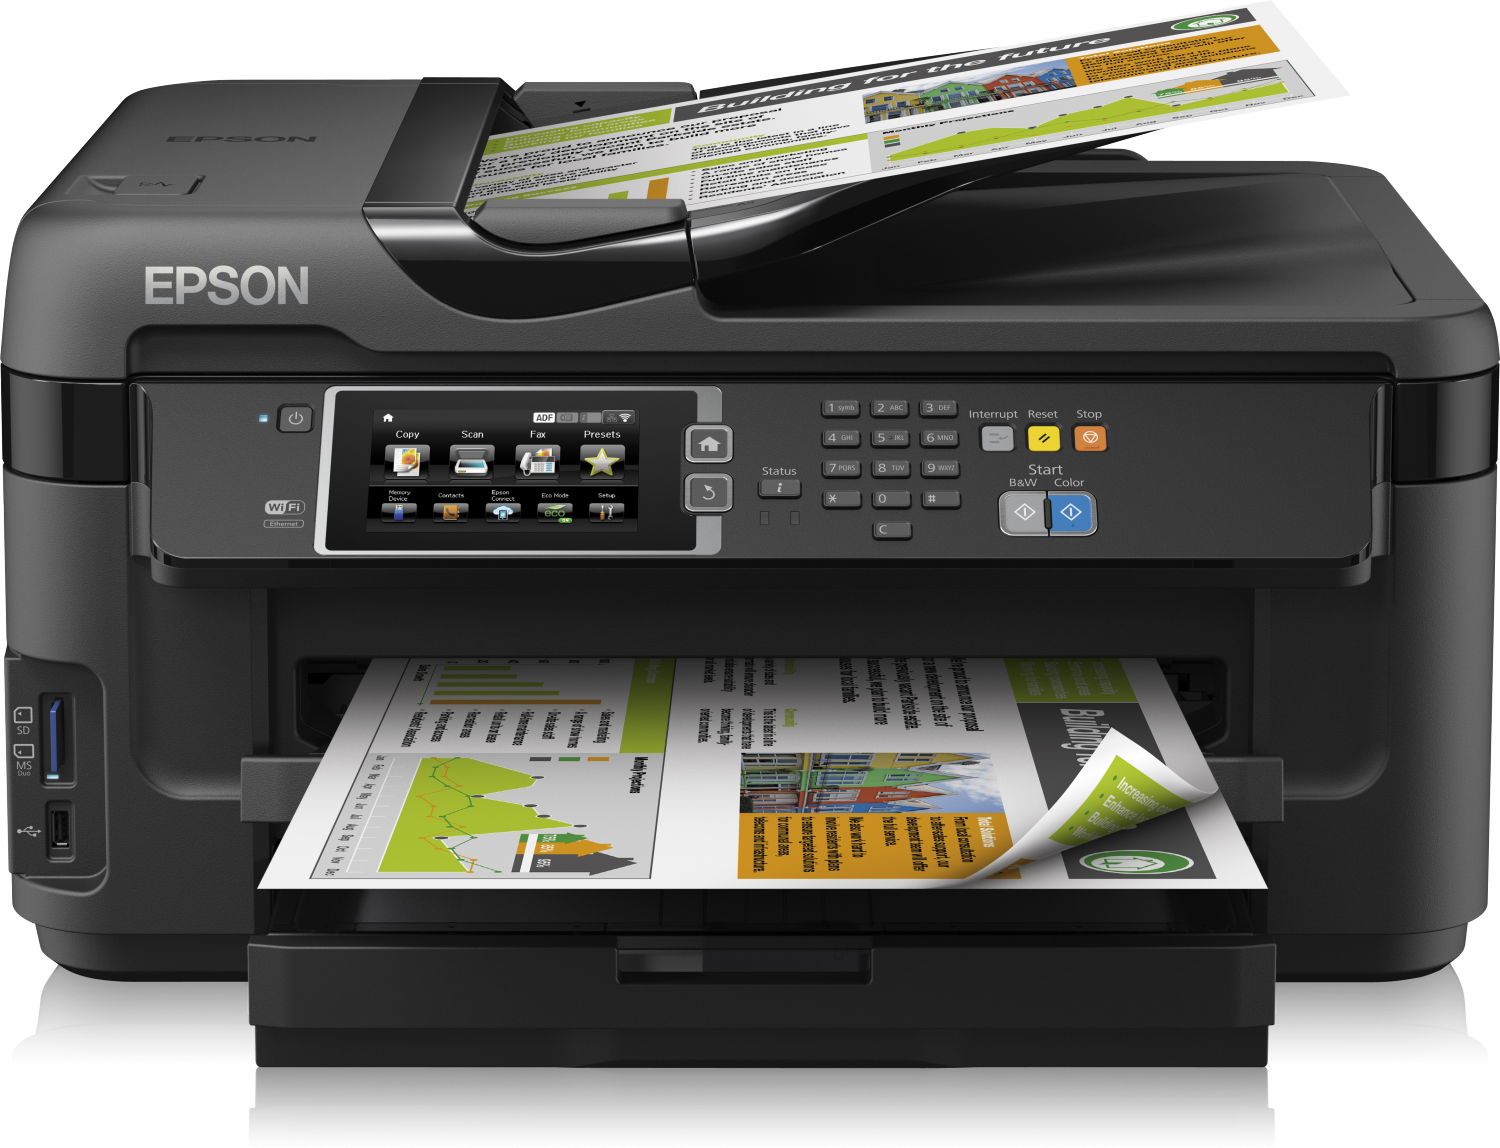 Epson WF-7620 Driver Linux Mint 18 How-to Download & Install - Featured